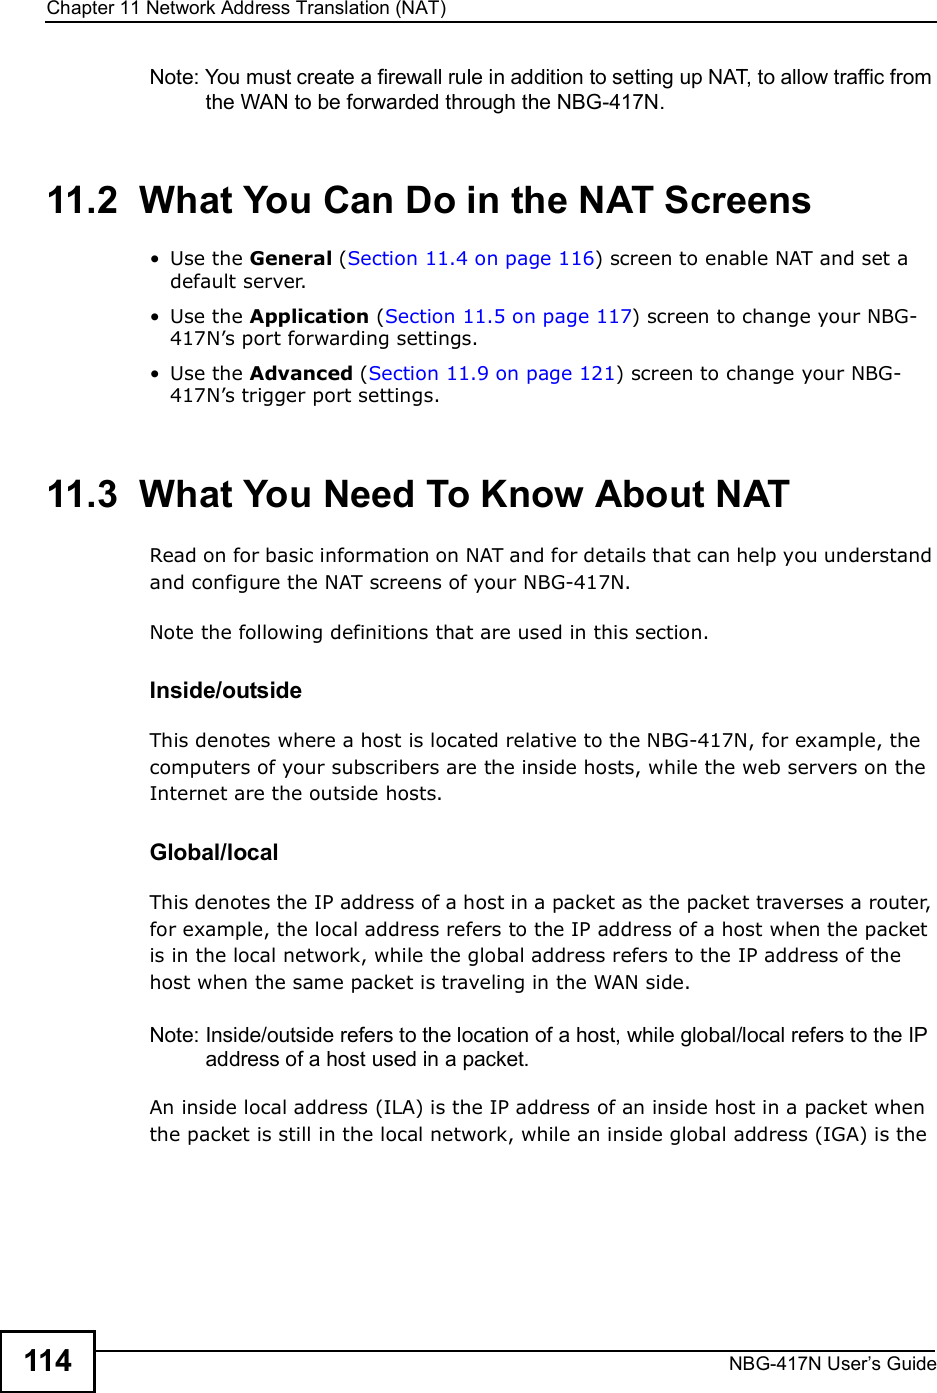 Chapter 11Network Address Translation (NAT)NBG-417N User s Guide114Note: You must create a firewall rule in addition to setting up NAT, to allow traffic from the WAN to be forwarded through the NBG-417N.11.2  What You Can Do in the NAT Screens Use the General (Section 11.4 on page 116) screen to enable NAT and set a default server. Use the Application (Section 11.5 on page 117) screen to change your NBG-417N!s port forwarding settings. Use the Advanced (Section 11.9 on page 121) screen to change your NBG-417N!s trigger port settings.11.3  What You Need To Know About NATRead on for basic information on NAT and for details that can help you understand and configure the NAT screens of your NBG-417N.Note the following definitions that are used in this section.Inside/outsideThis denotes where a host is located relative to the NBG-417N, for example, the computers of your subscribers are the inside hosts, while the web servers on the Internet are the outside hosts. Global/local This denotes the IP address of a host in a packet as the packet traverses a router, for example, the local address refers to the IP address of a host when the packet is in the local network, while the global address refers to the IP address of the host when the same packet is traveling in the WAN side. Note: Inside/outside refers to the location of a host, while global/local refers to the IP address of a host used in a packet. An inside local address (ILA) is the IP address of an inside host in a packet when the packet is still in the local network, while an inside global address (IGA) is the 